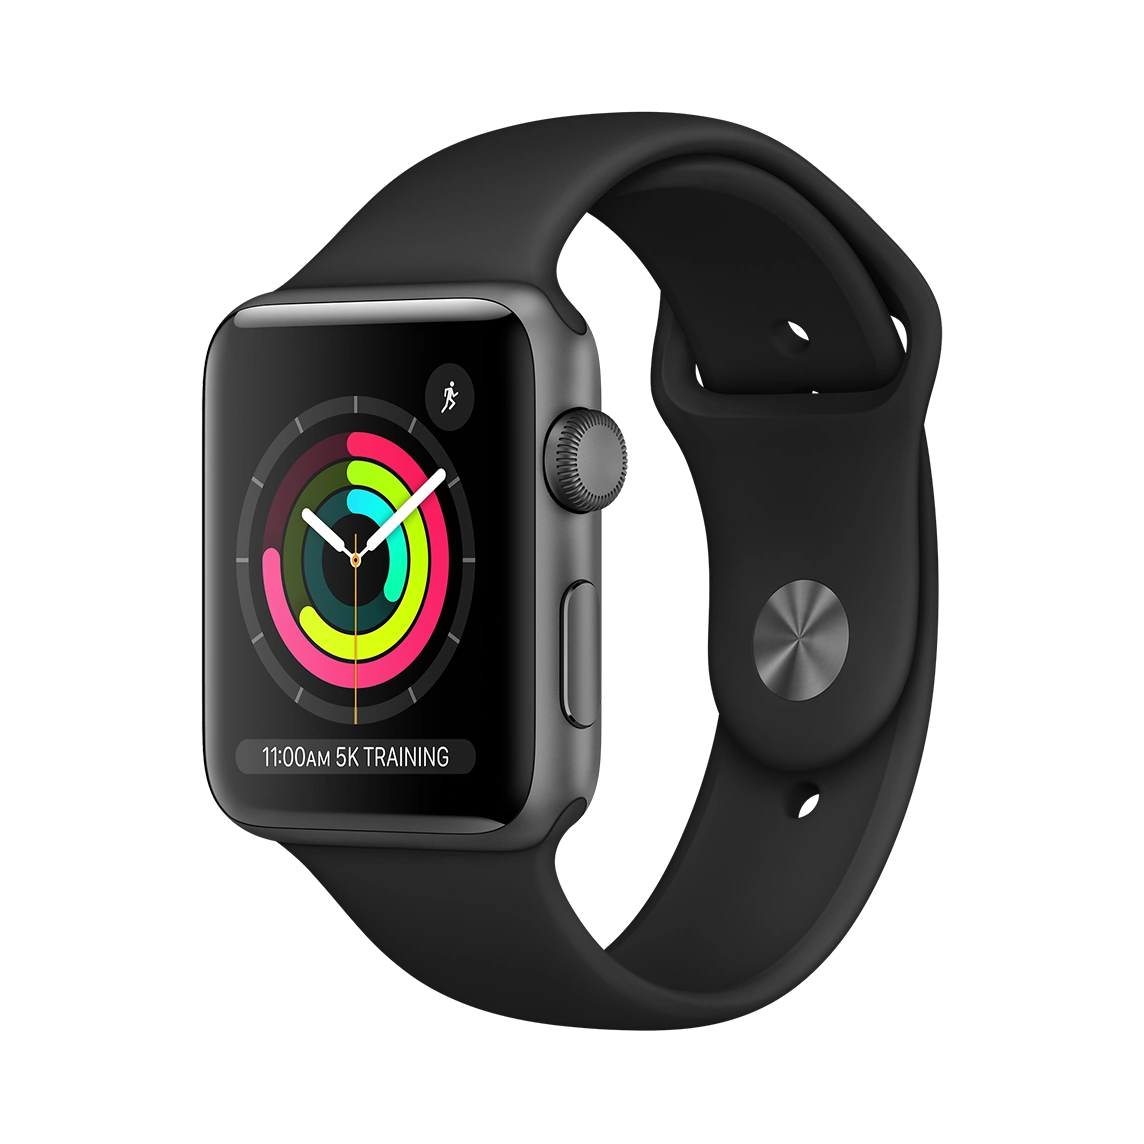 Apple Watch Series 3 Space Gray Aluminum Case with Black Sport Band